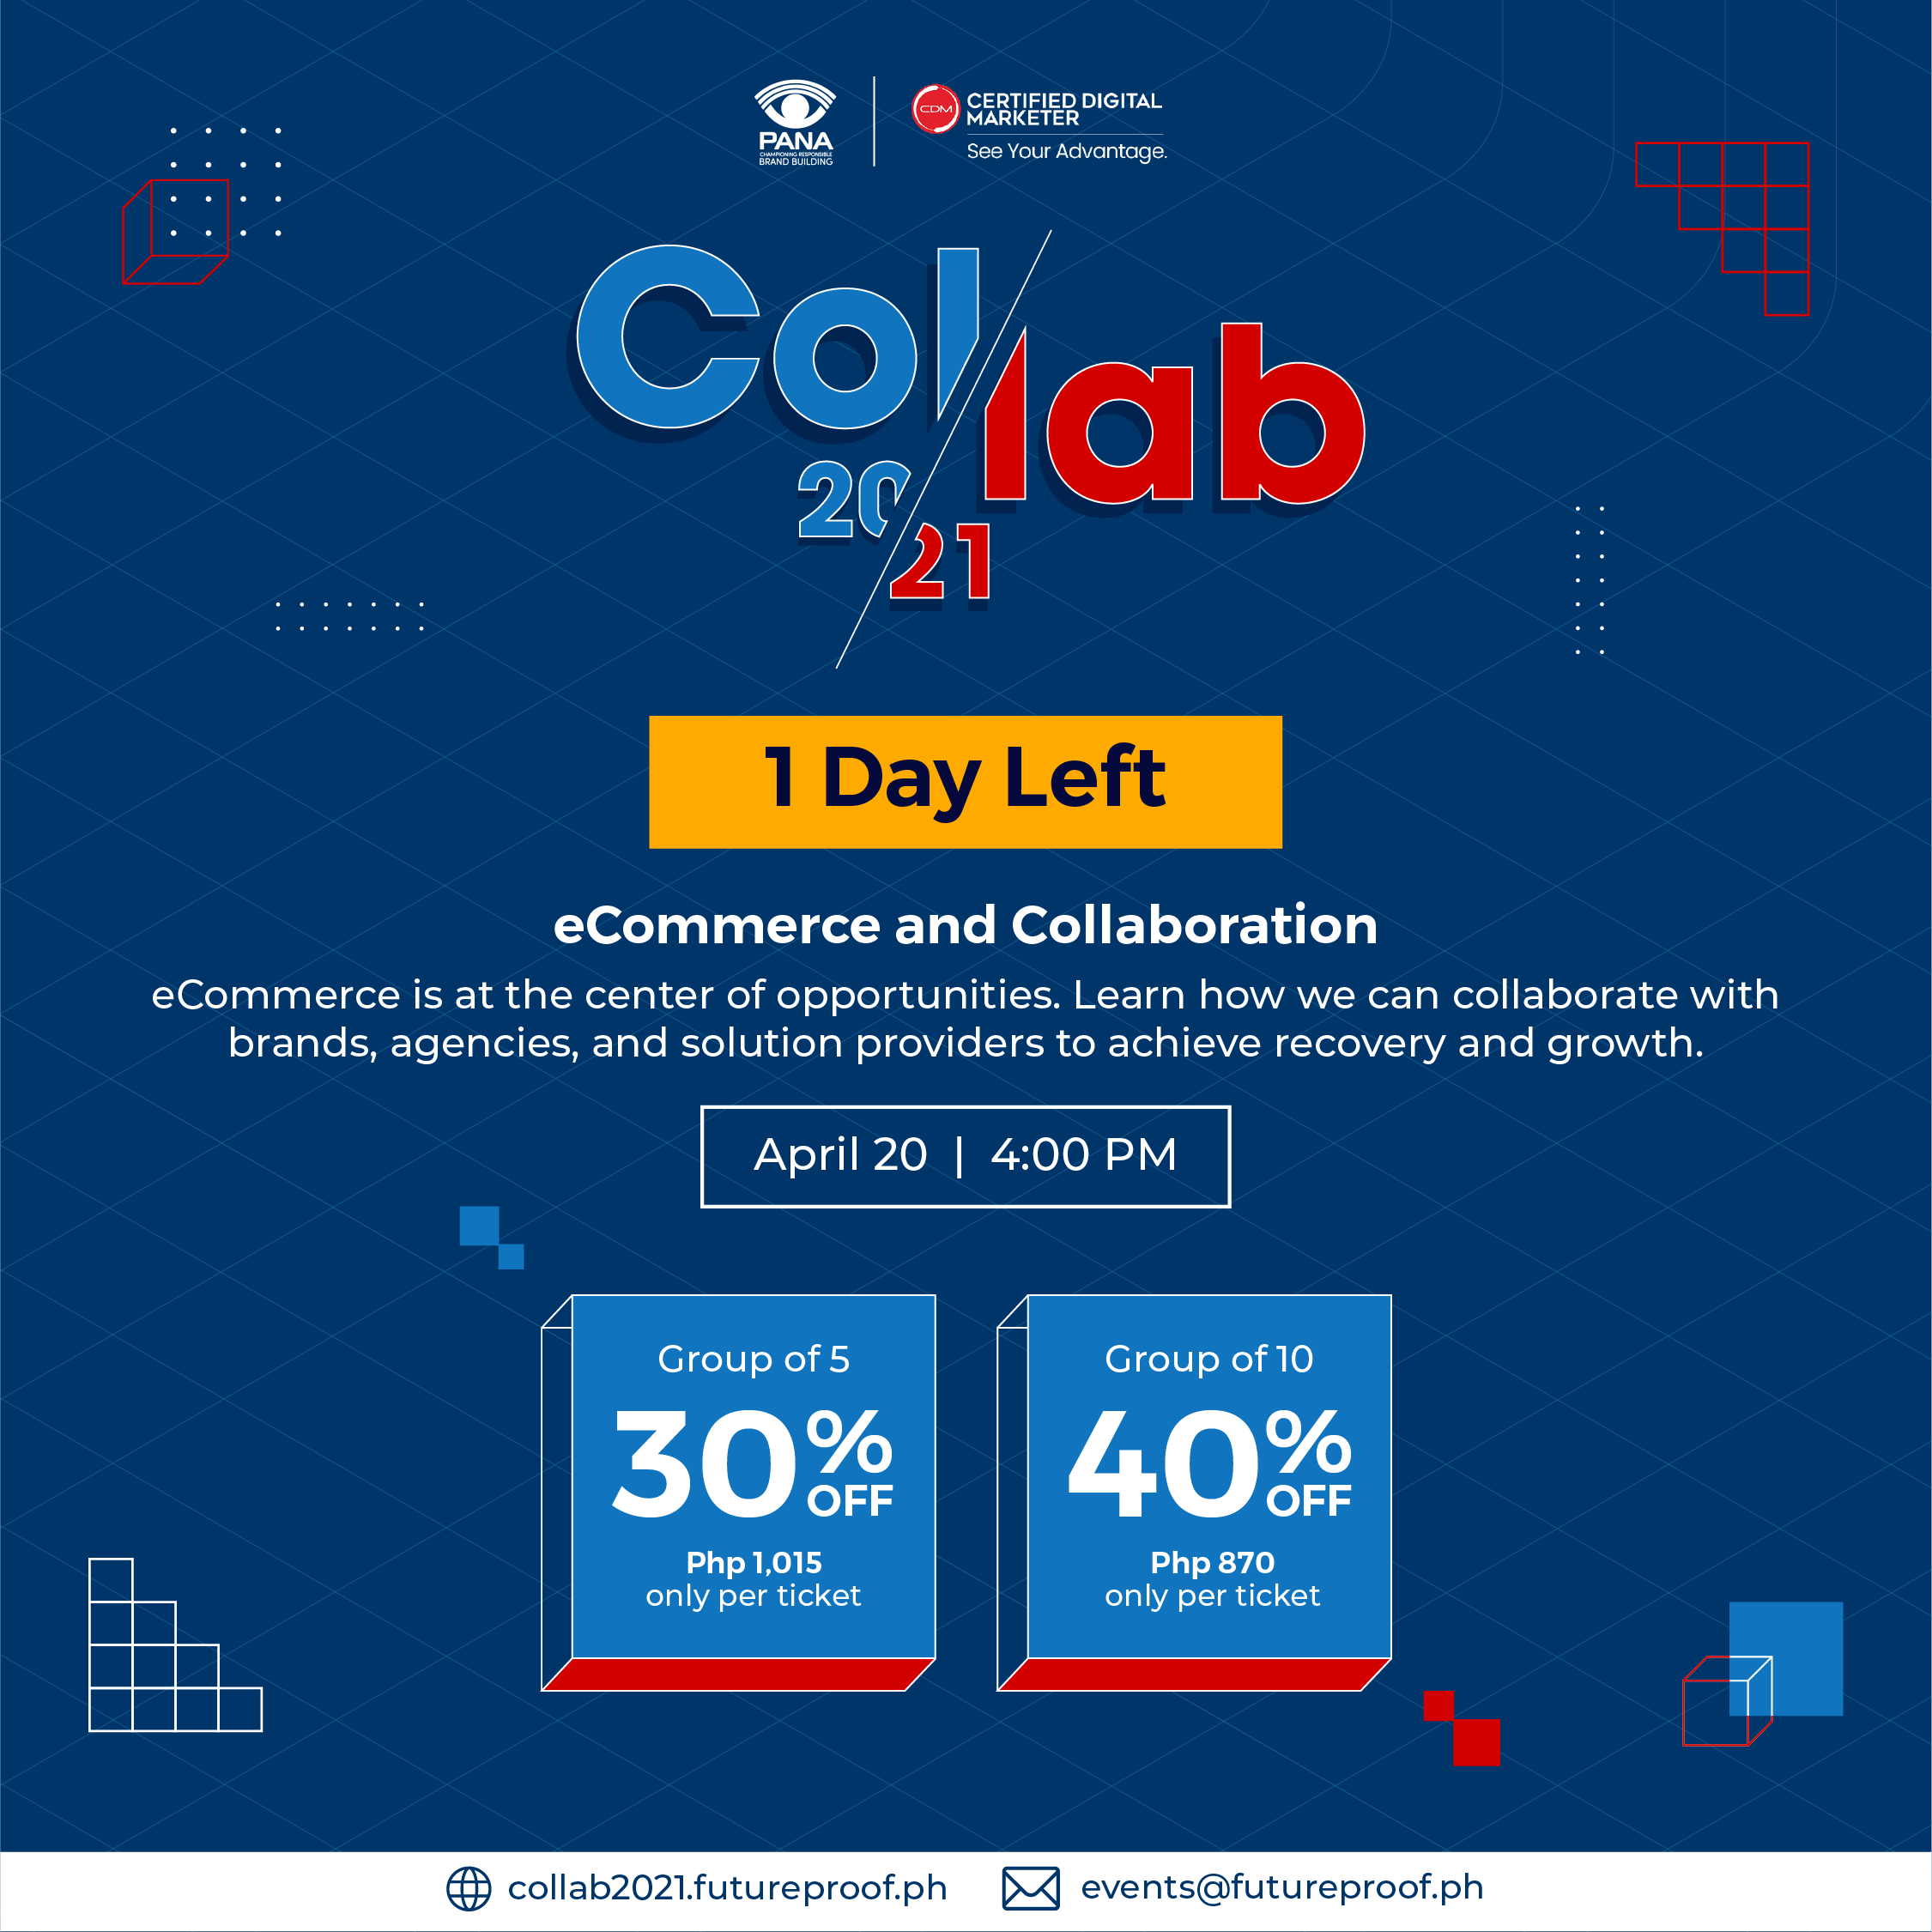 First-ever Collab 2021 web conference on e-commerce and collaboration